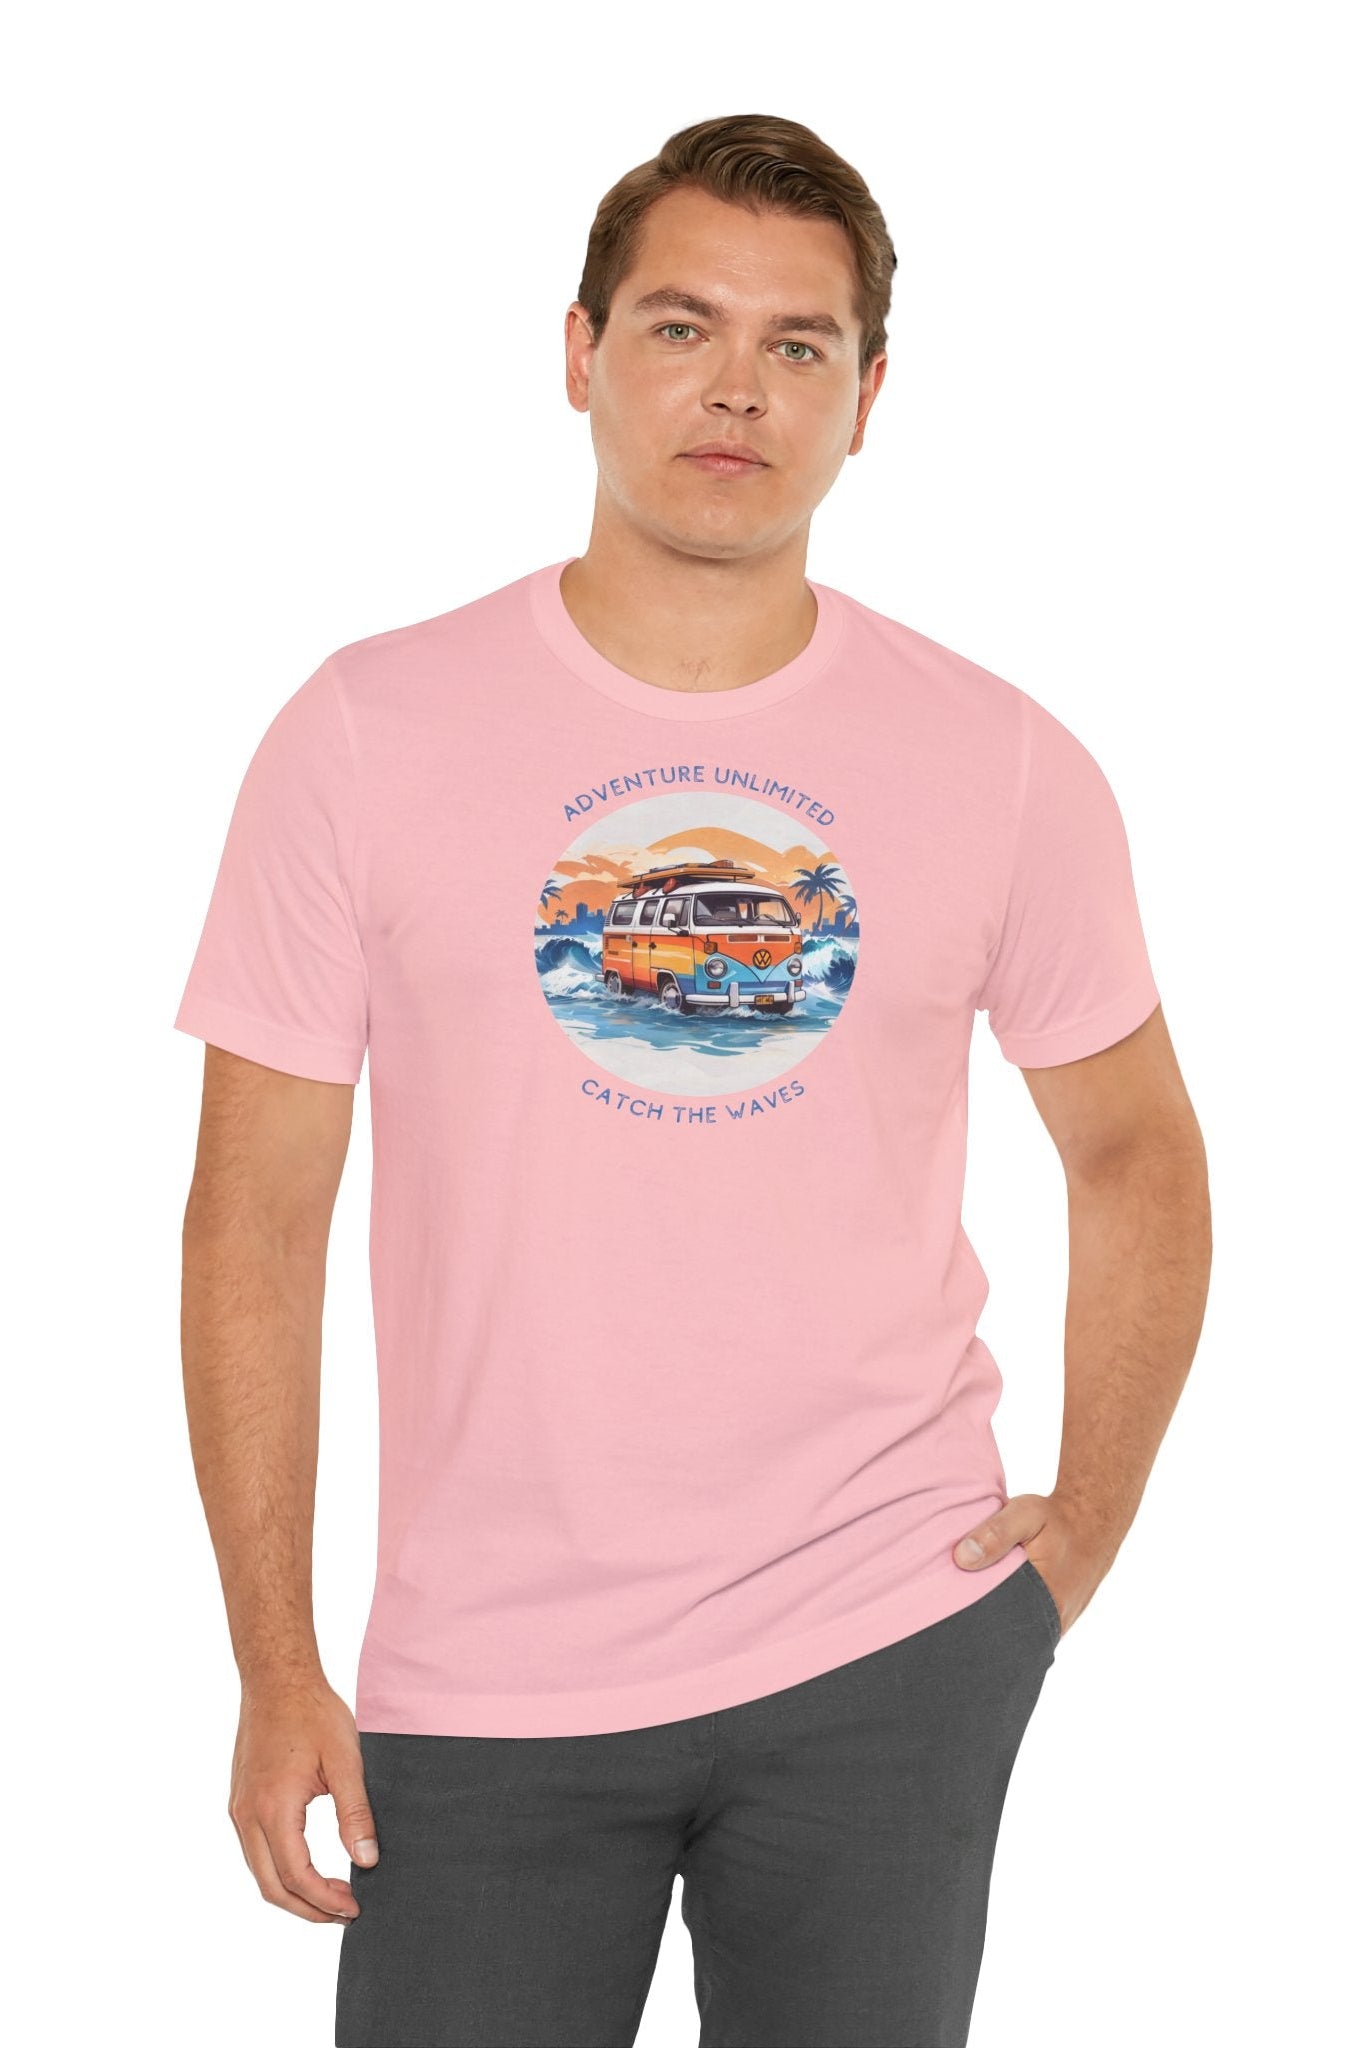 Man wearing pink t-shirt with ’Adventure Unlimited - Surfing’ design by Bella & Canvas - EU, printed using direct-to-garment technology